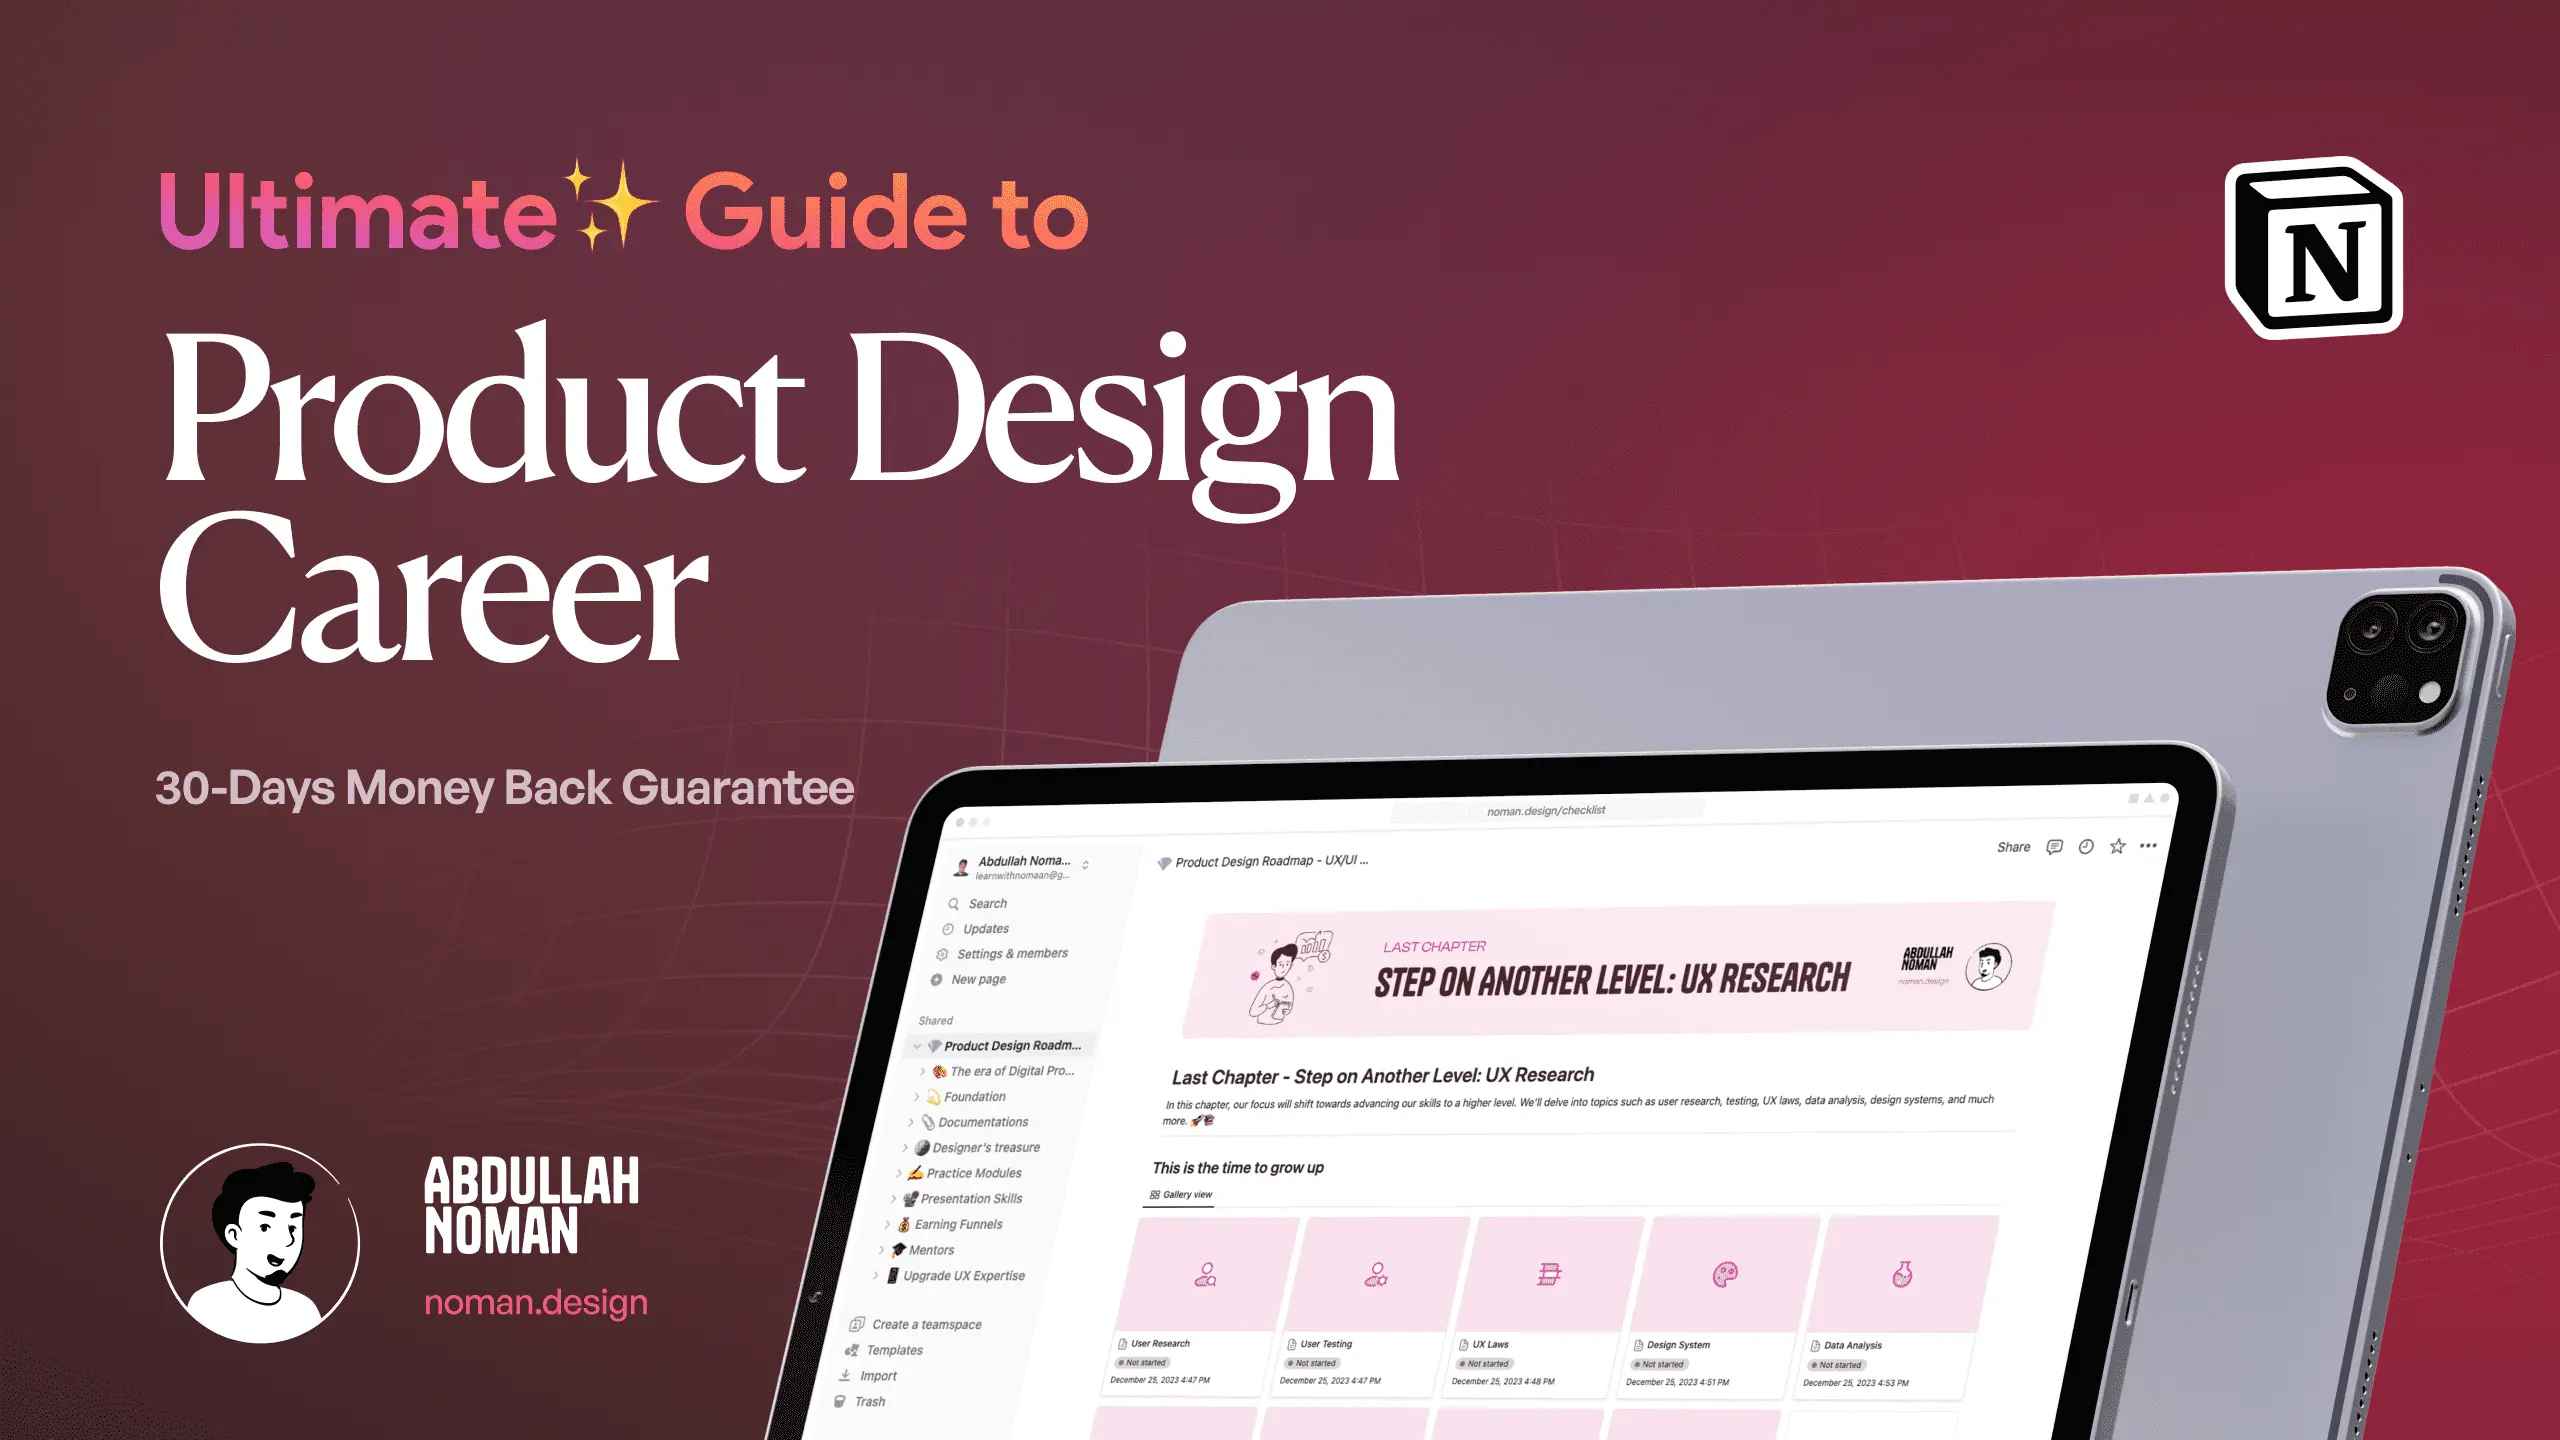 Ultimate Guide For Product Design Career image